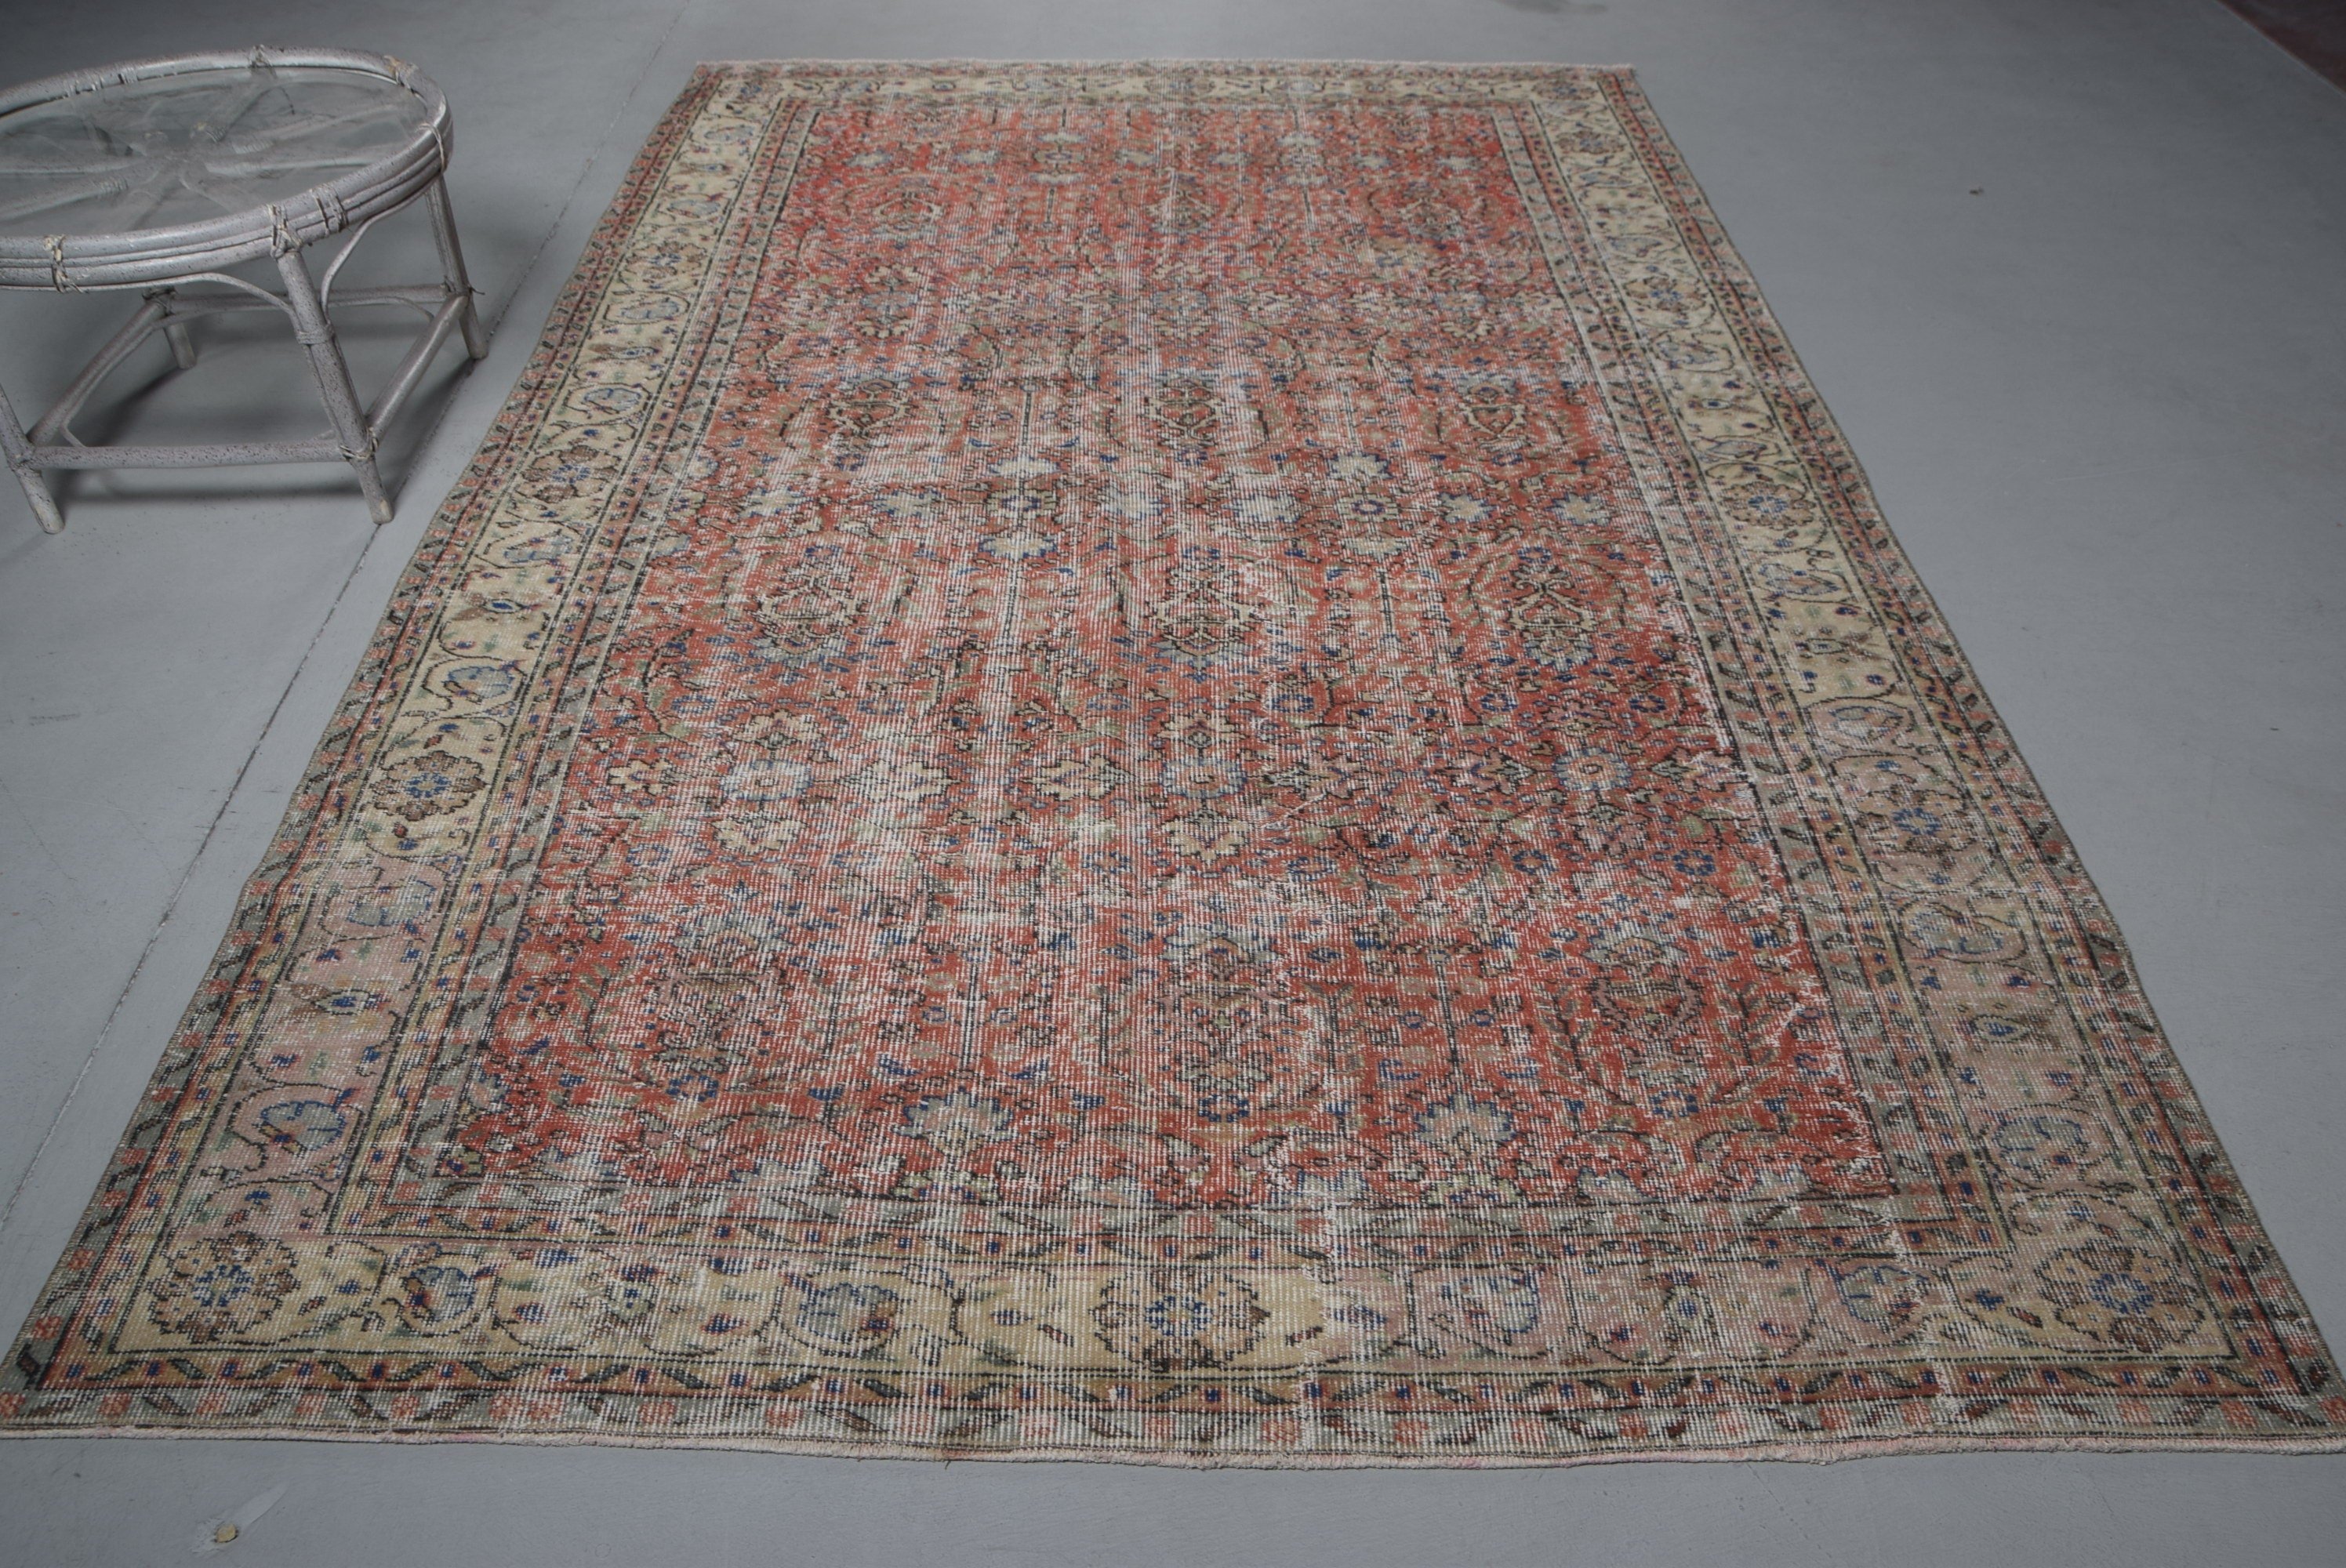 Living Room Rug, Turkish Rugs, Moroccan Rug, Red Kitchen Rugs, Dining Room Rug, Vintage Rug, Anatolian Rugs, 6.4x10.2 ft Large Rugs